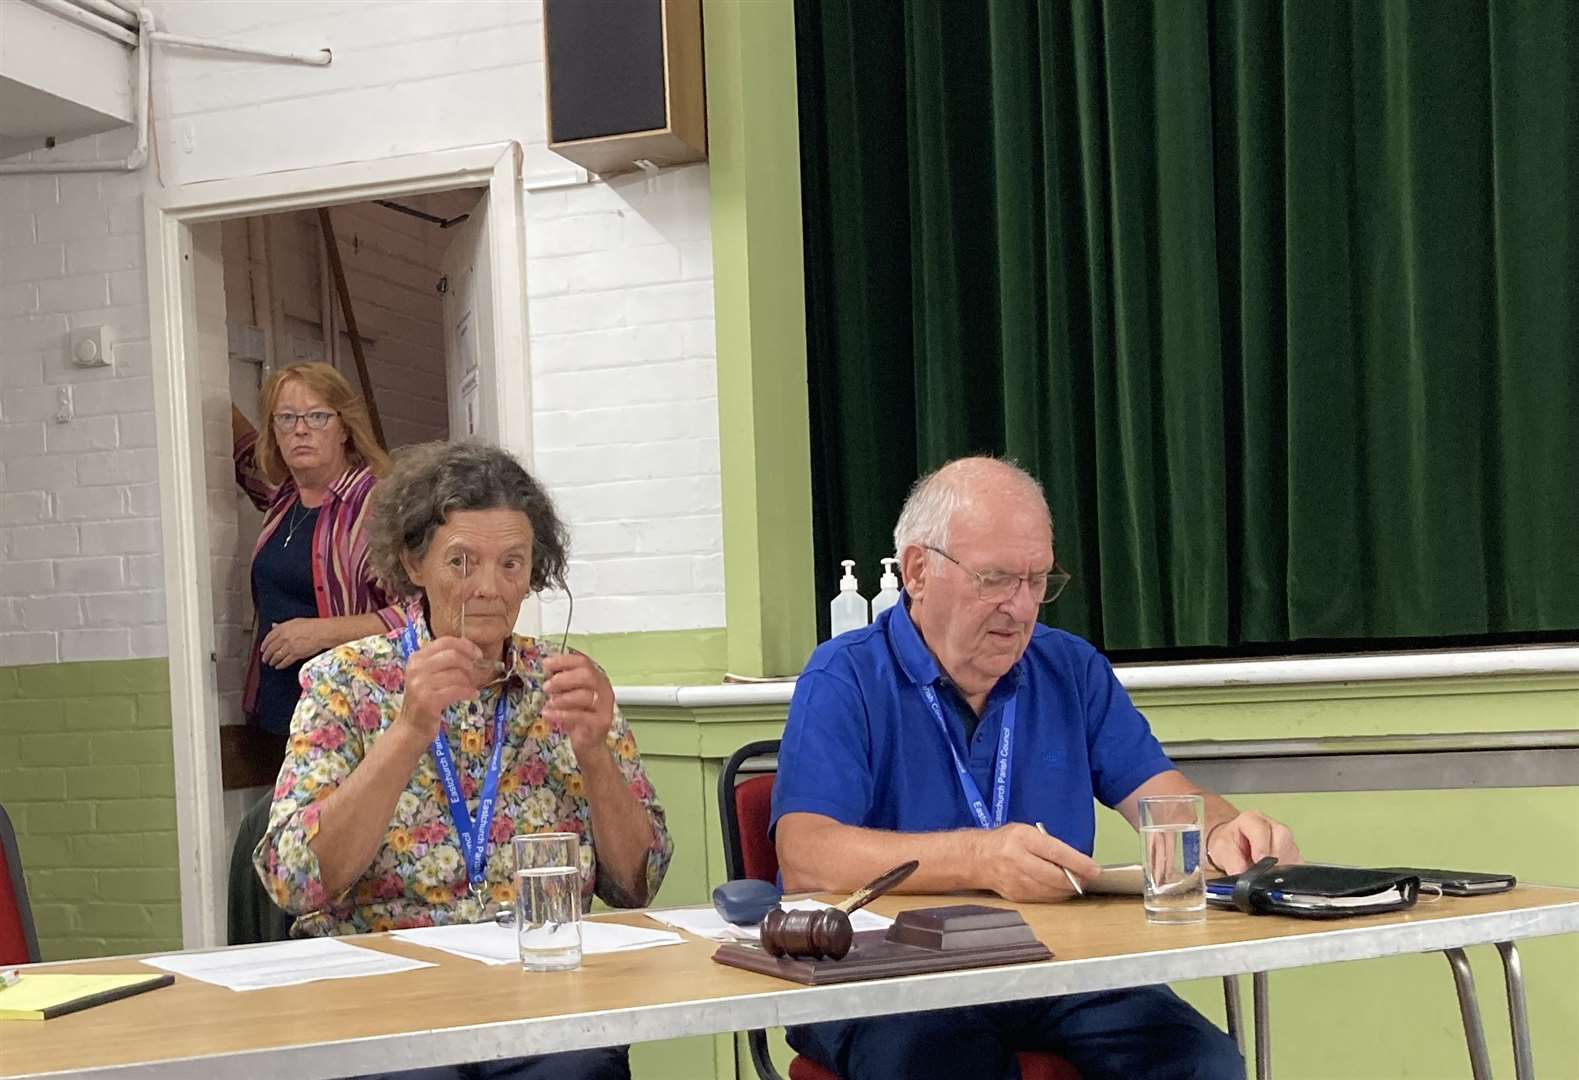 Eastchurch parish council chairman Kathleen Carter and vice-chairman Mike Brown at Eastchurch village hall